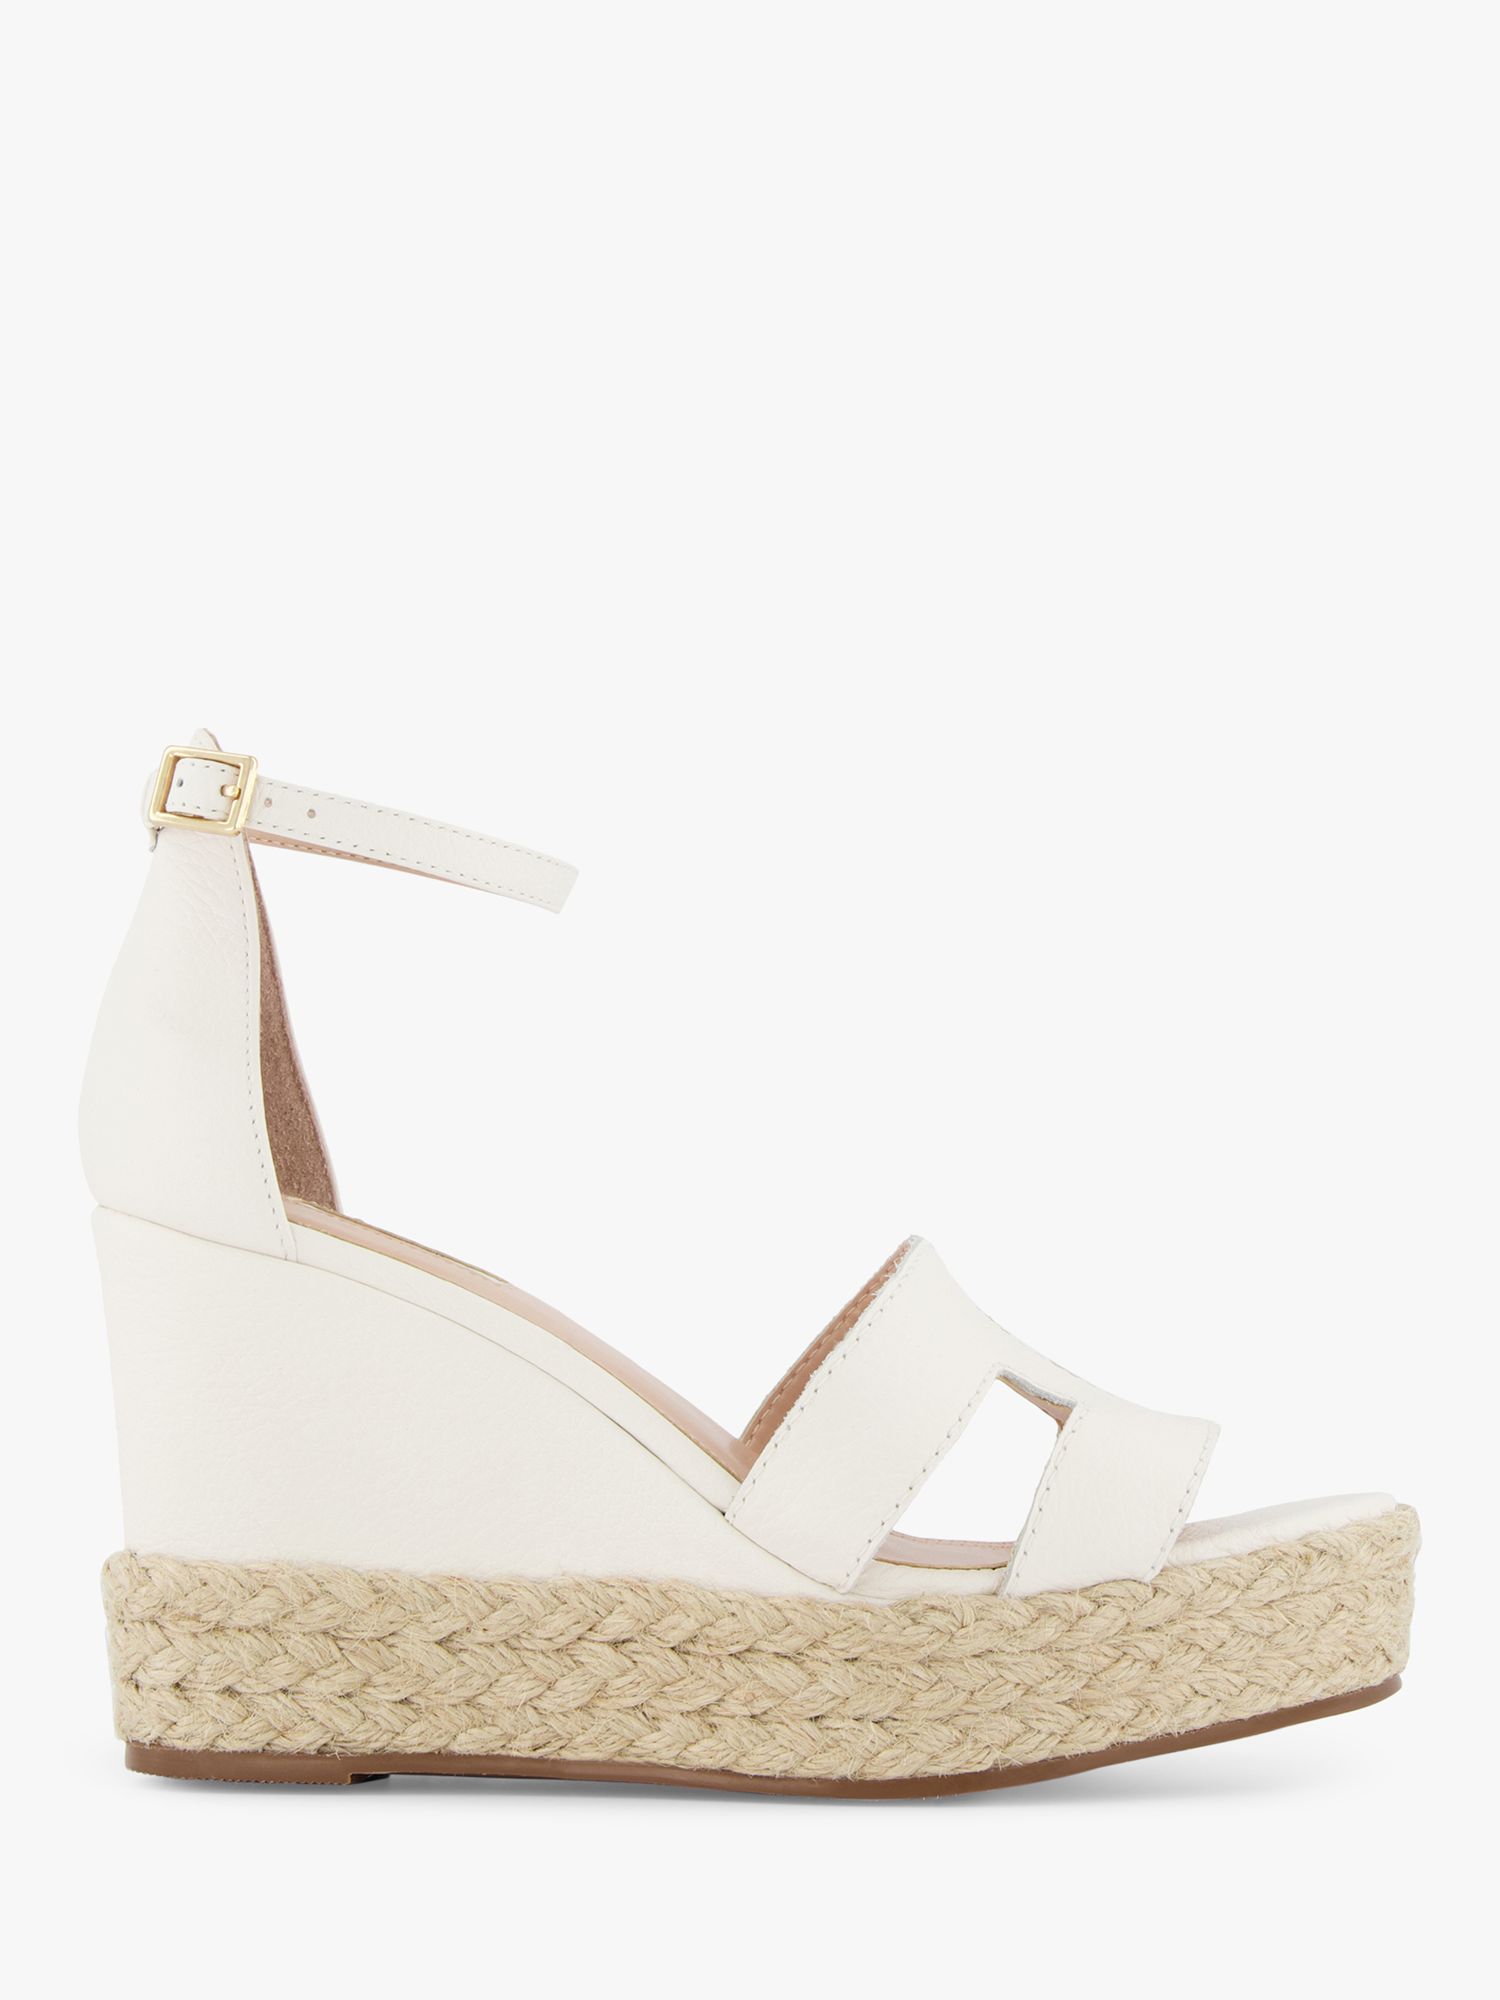 Dune Koupe Leather Espadrille Wedge Sandals, White at John Lewis & Partners